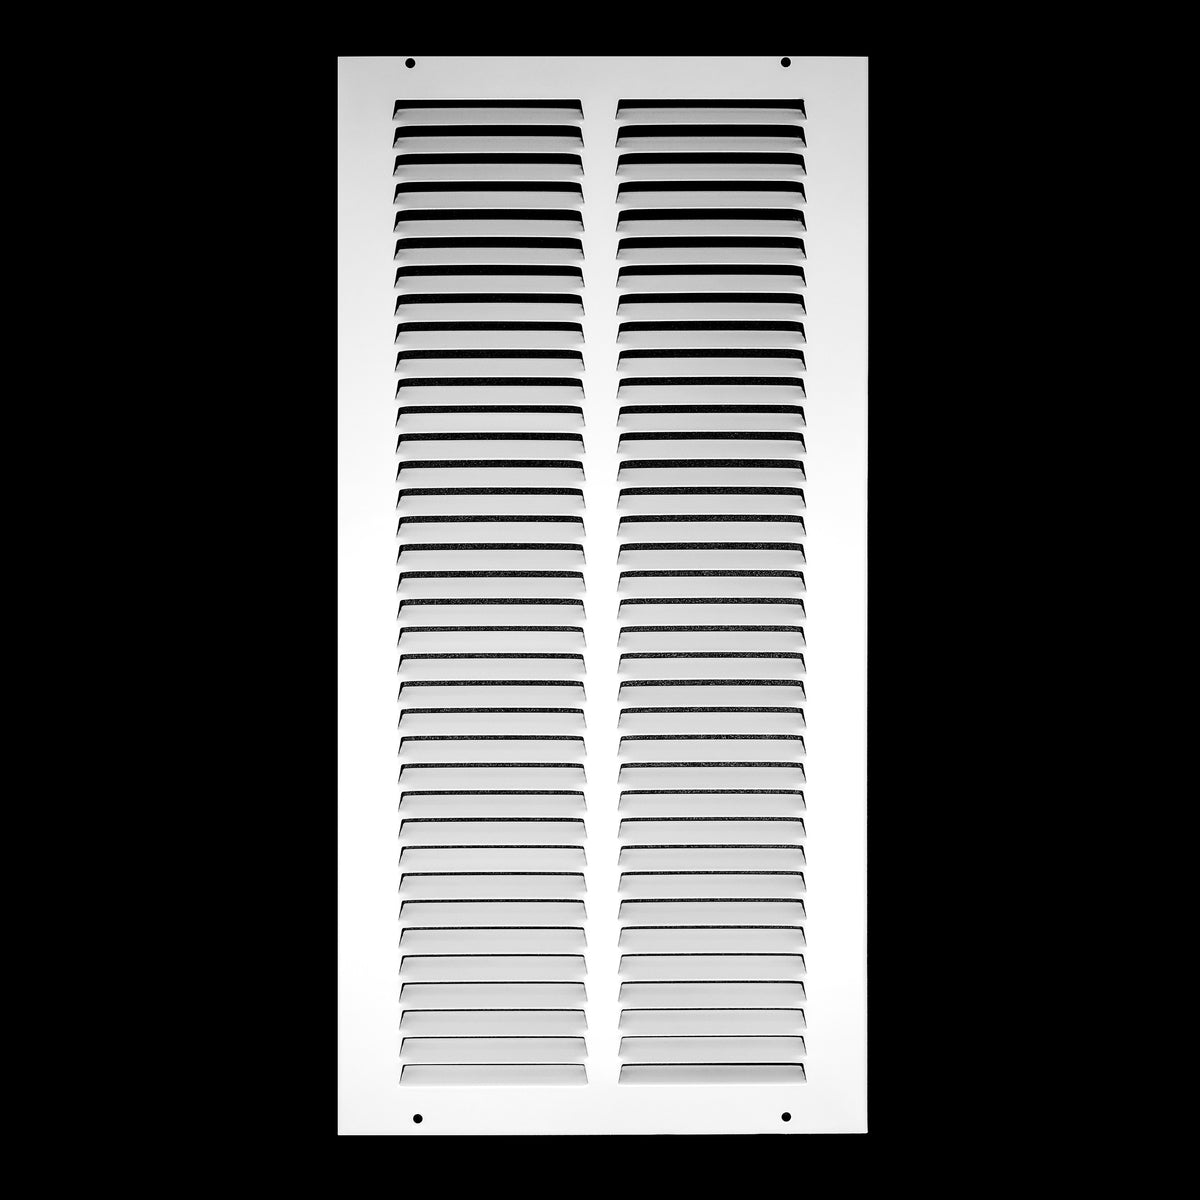 airgrilles 8" x 20" duct opening steel return air grille for sidewall and ceiling hnd-flt-1rag-wh-8x20 756014647952 1